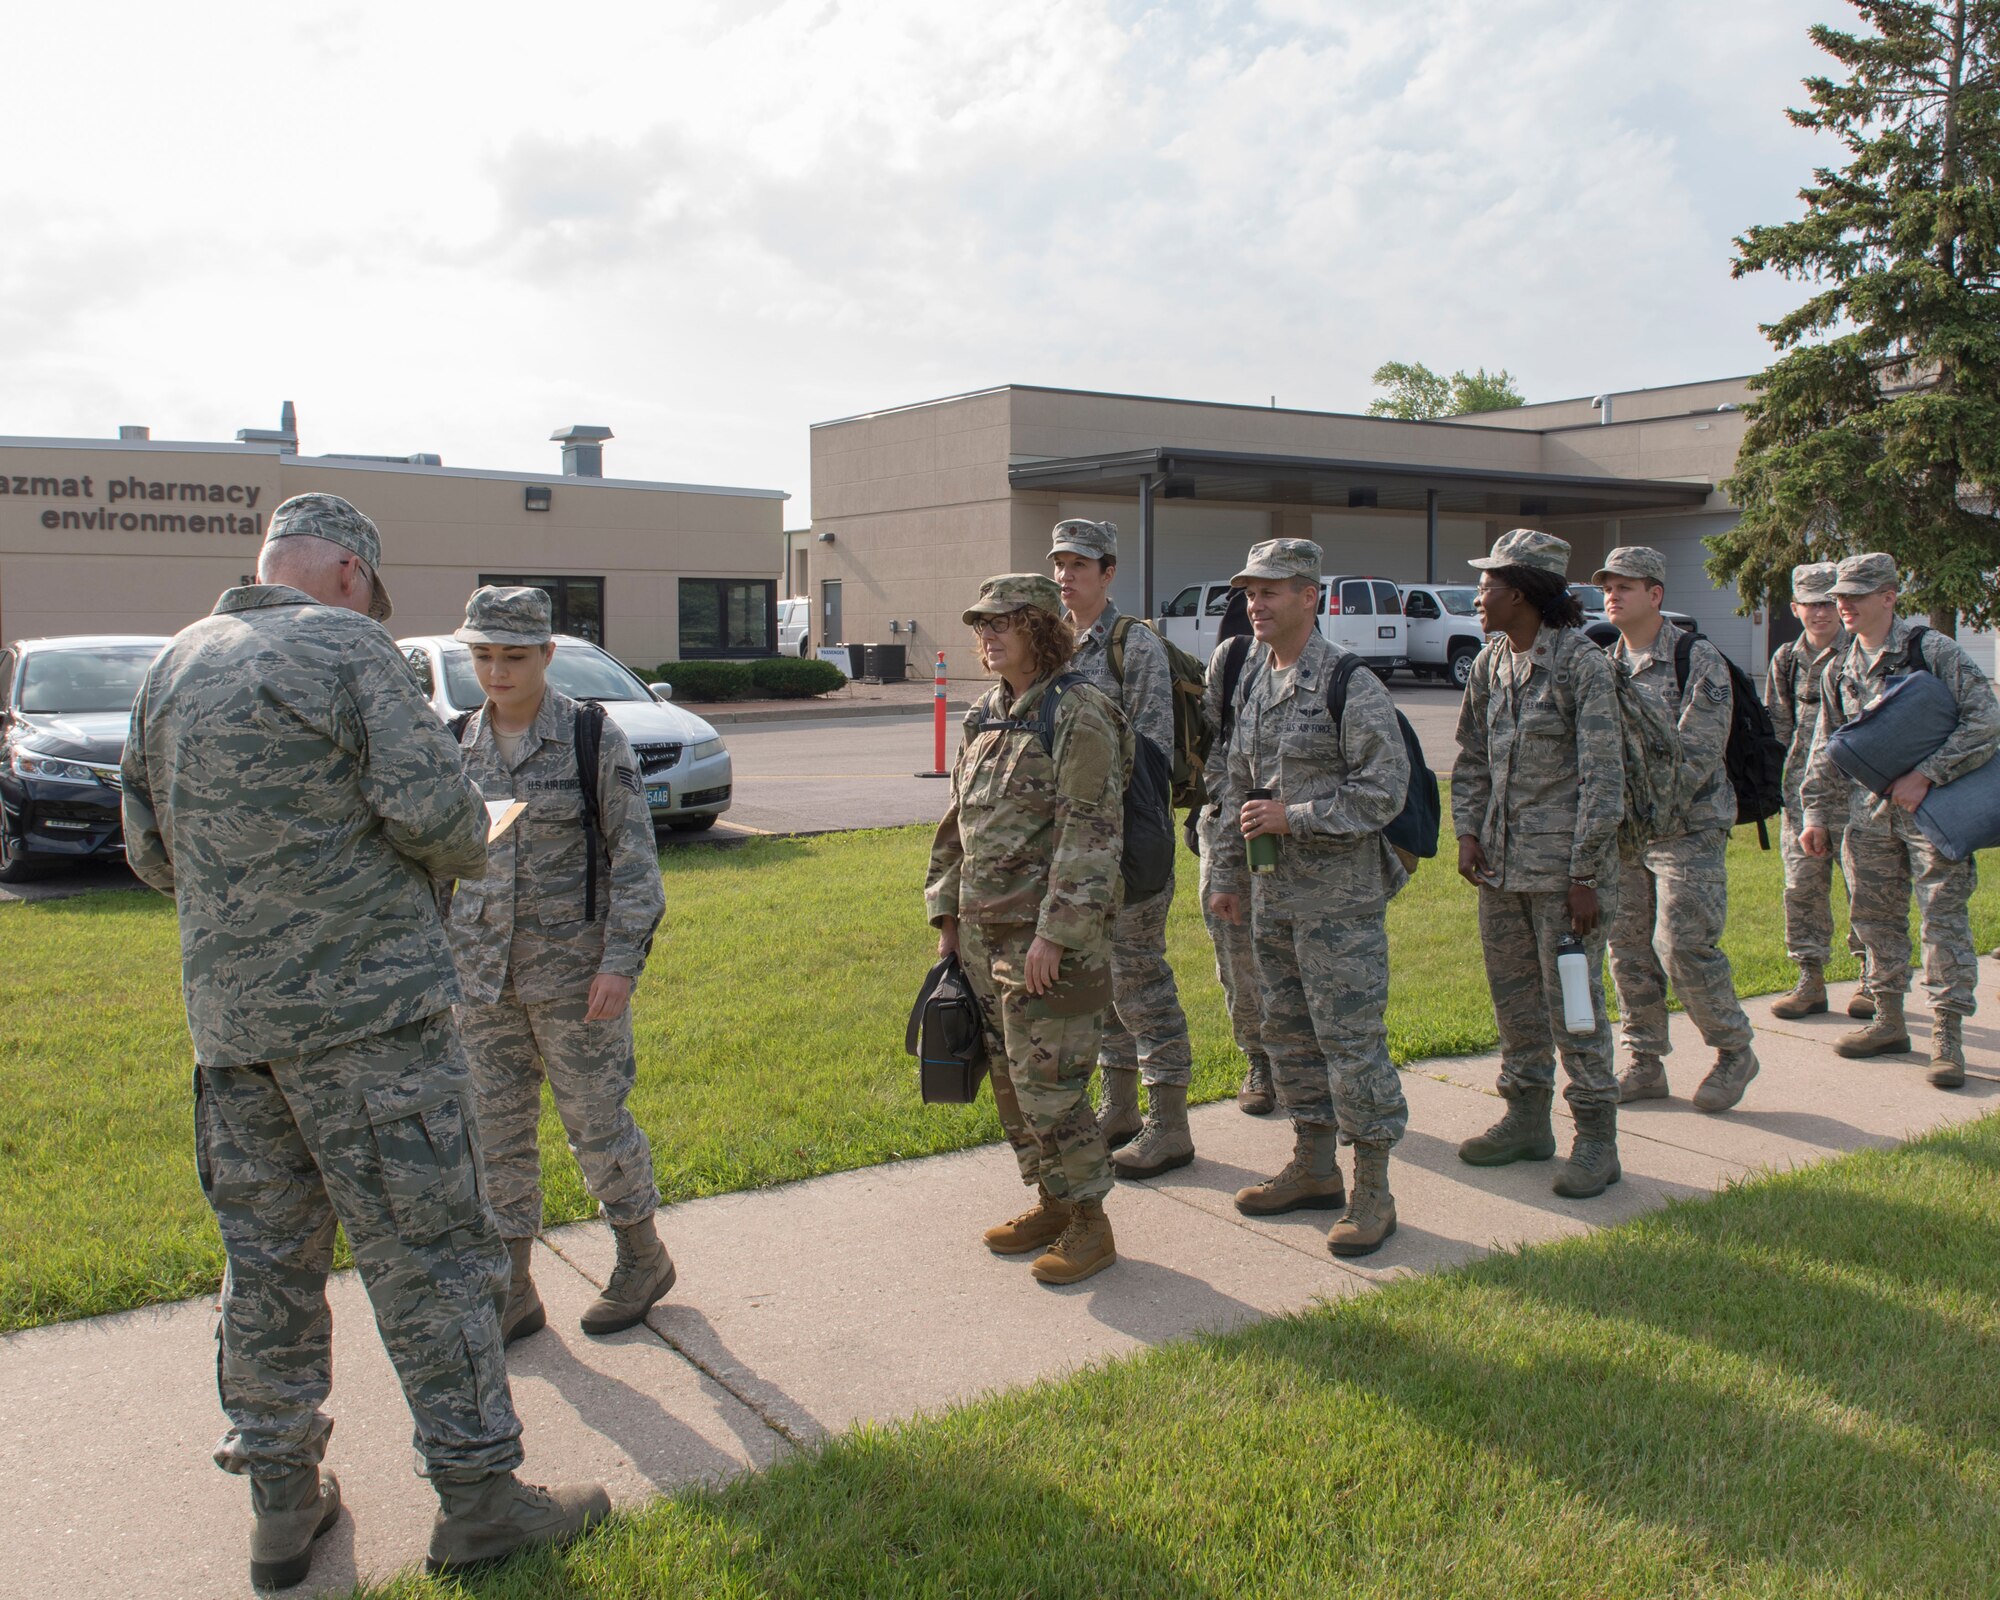 Airmen assigned to the 115th Fighter Wing, Madison, Wisconsin, prepare to travel to New York July 9, 2019, for the Greater Chenango Cares and Healthy Cortland Innovative Readiness Training. The IRT mission is comprised of Active Duty Air Force, Army, Navy, Reserves and National Guard troops working alongside our local community partners to bring health care and veterinary services to the underserved communities of Cortland and Chenango counties. (U.S. Air National Guard photo by Airman 1st Class Cameron Lewis)